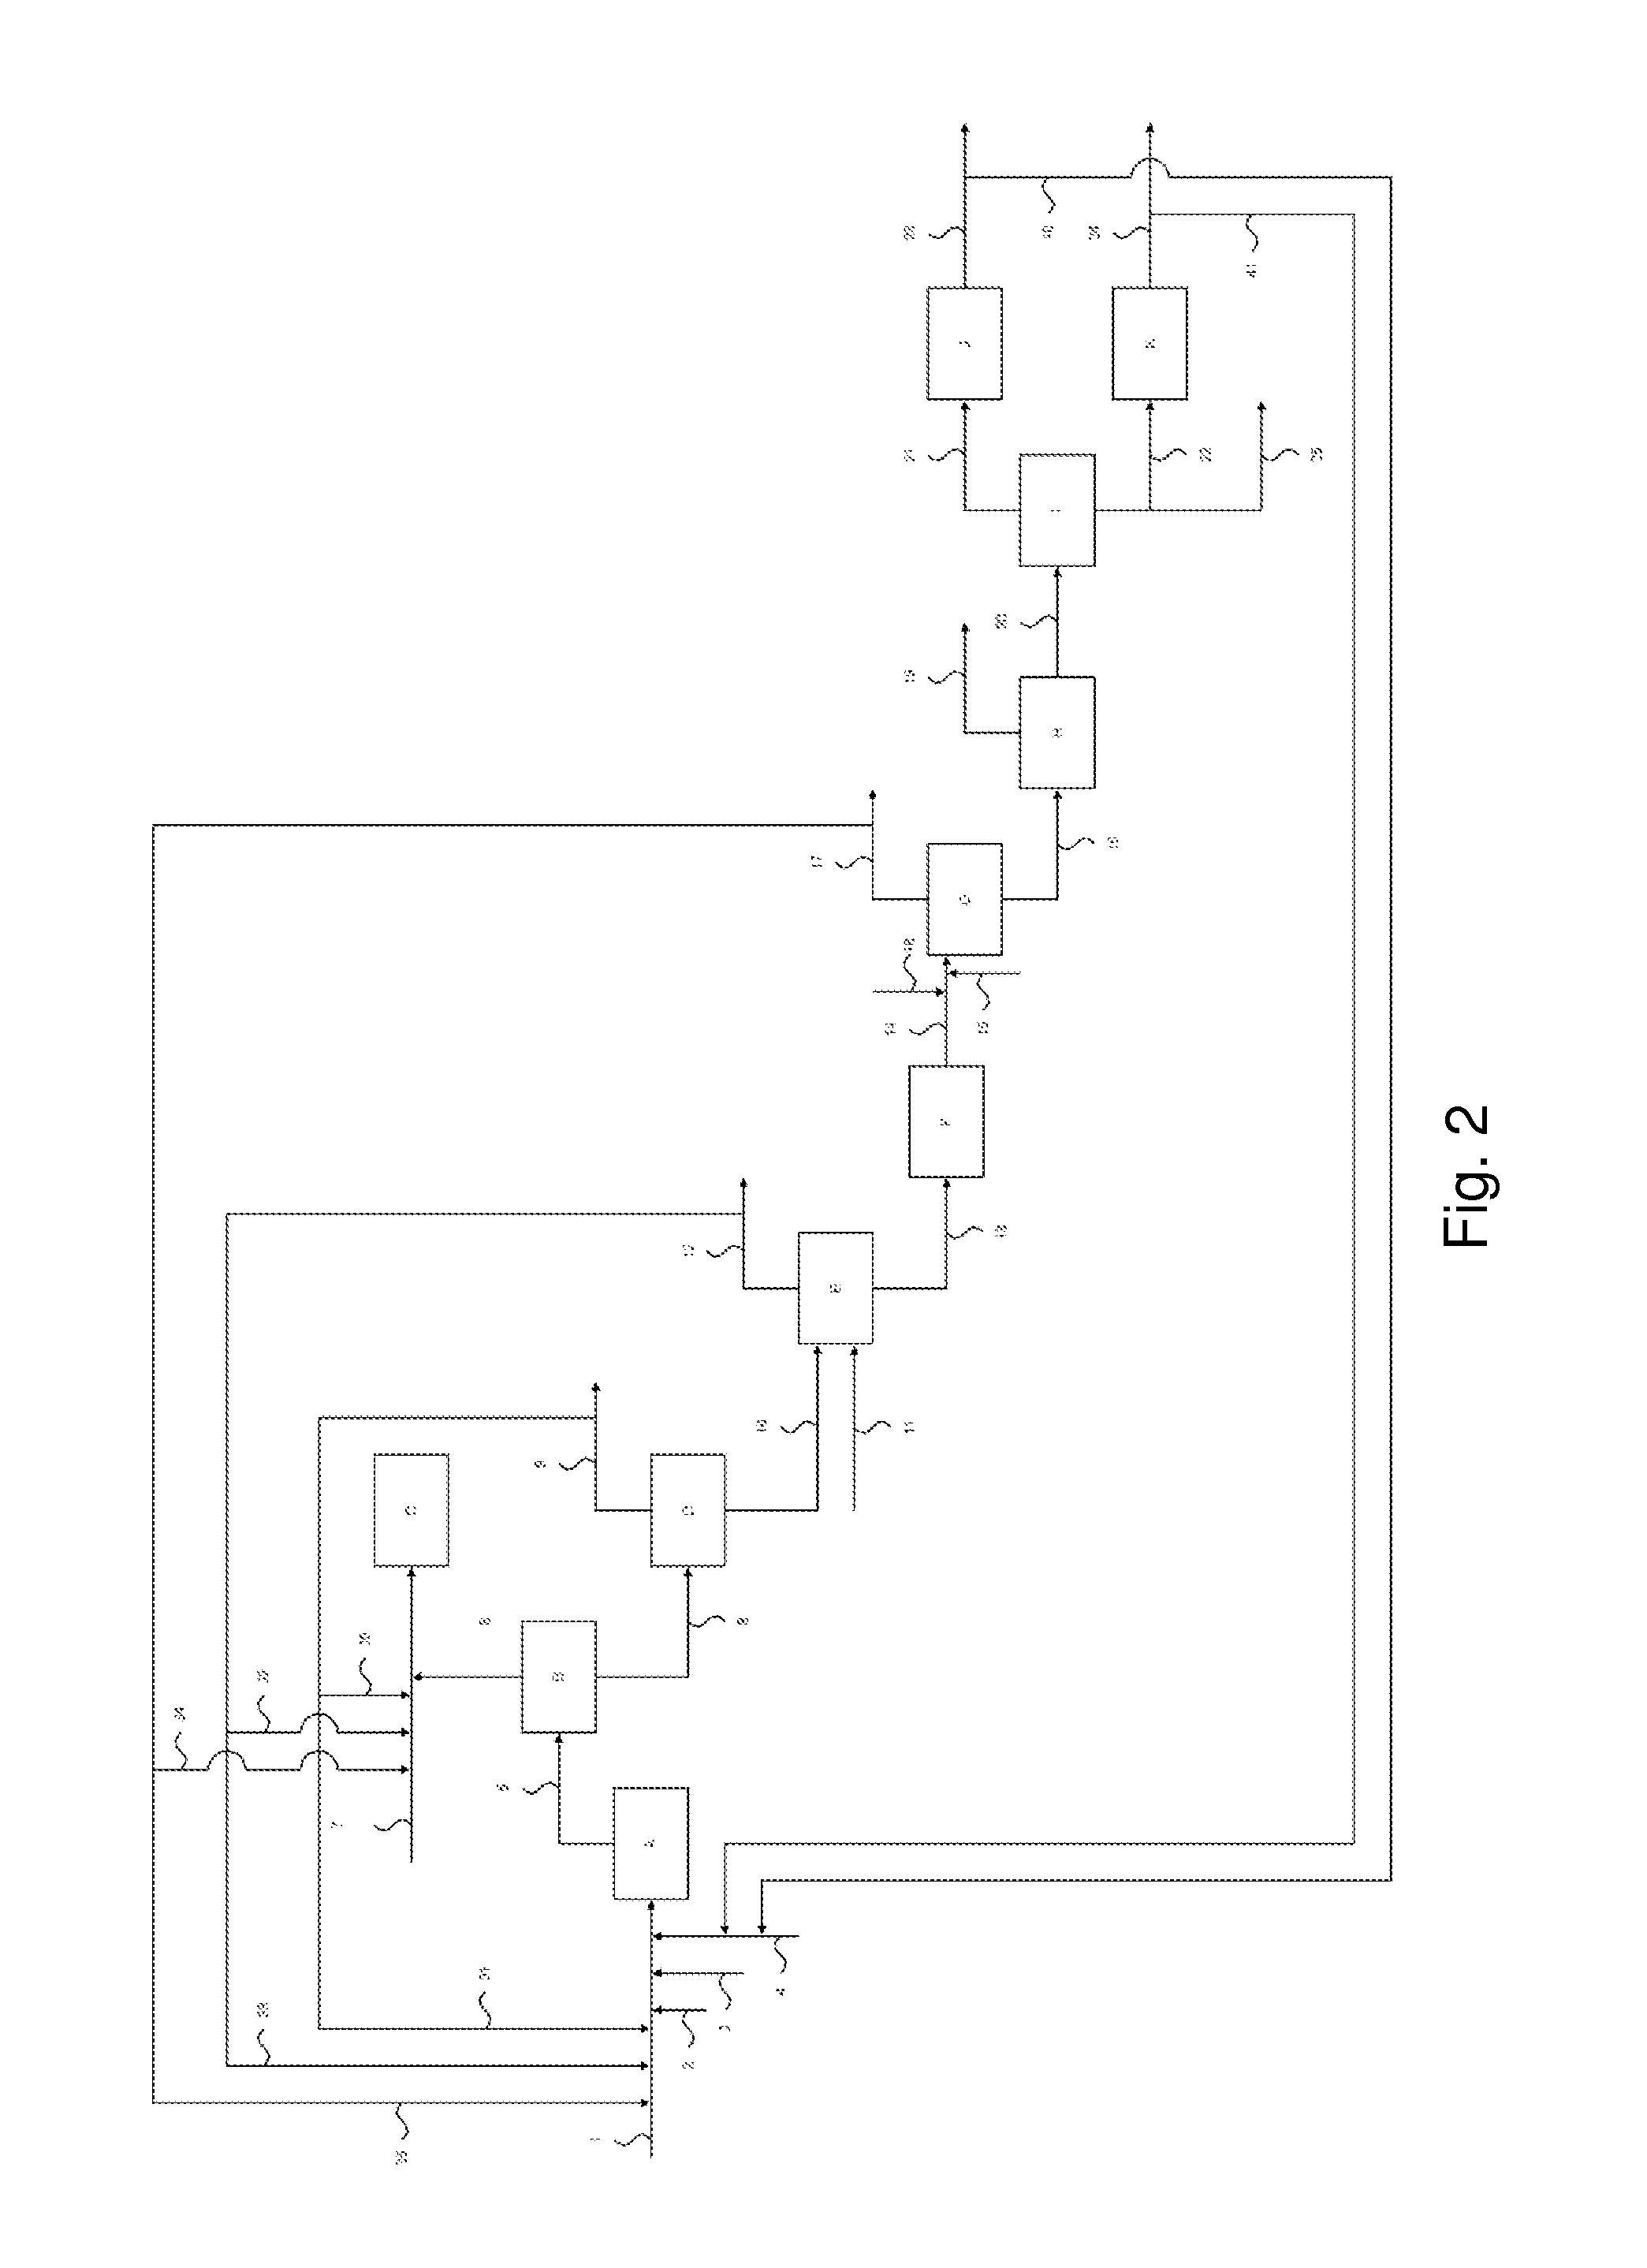 Process for the hydroconversion of petroleum feedstocks via slurry technology allowing the recovery of metals from the catalyst and feedstock using a leaching step